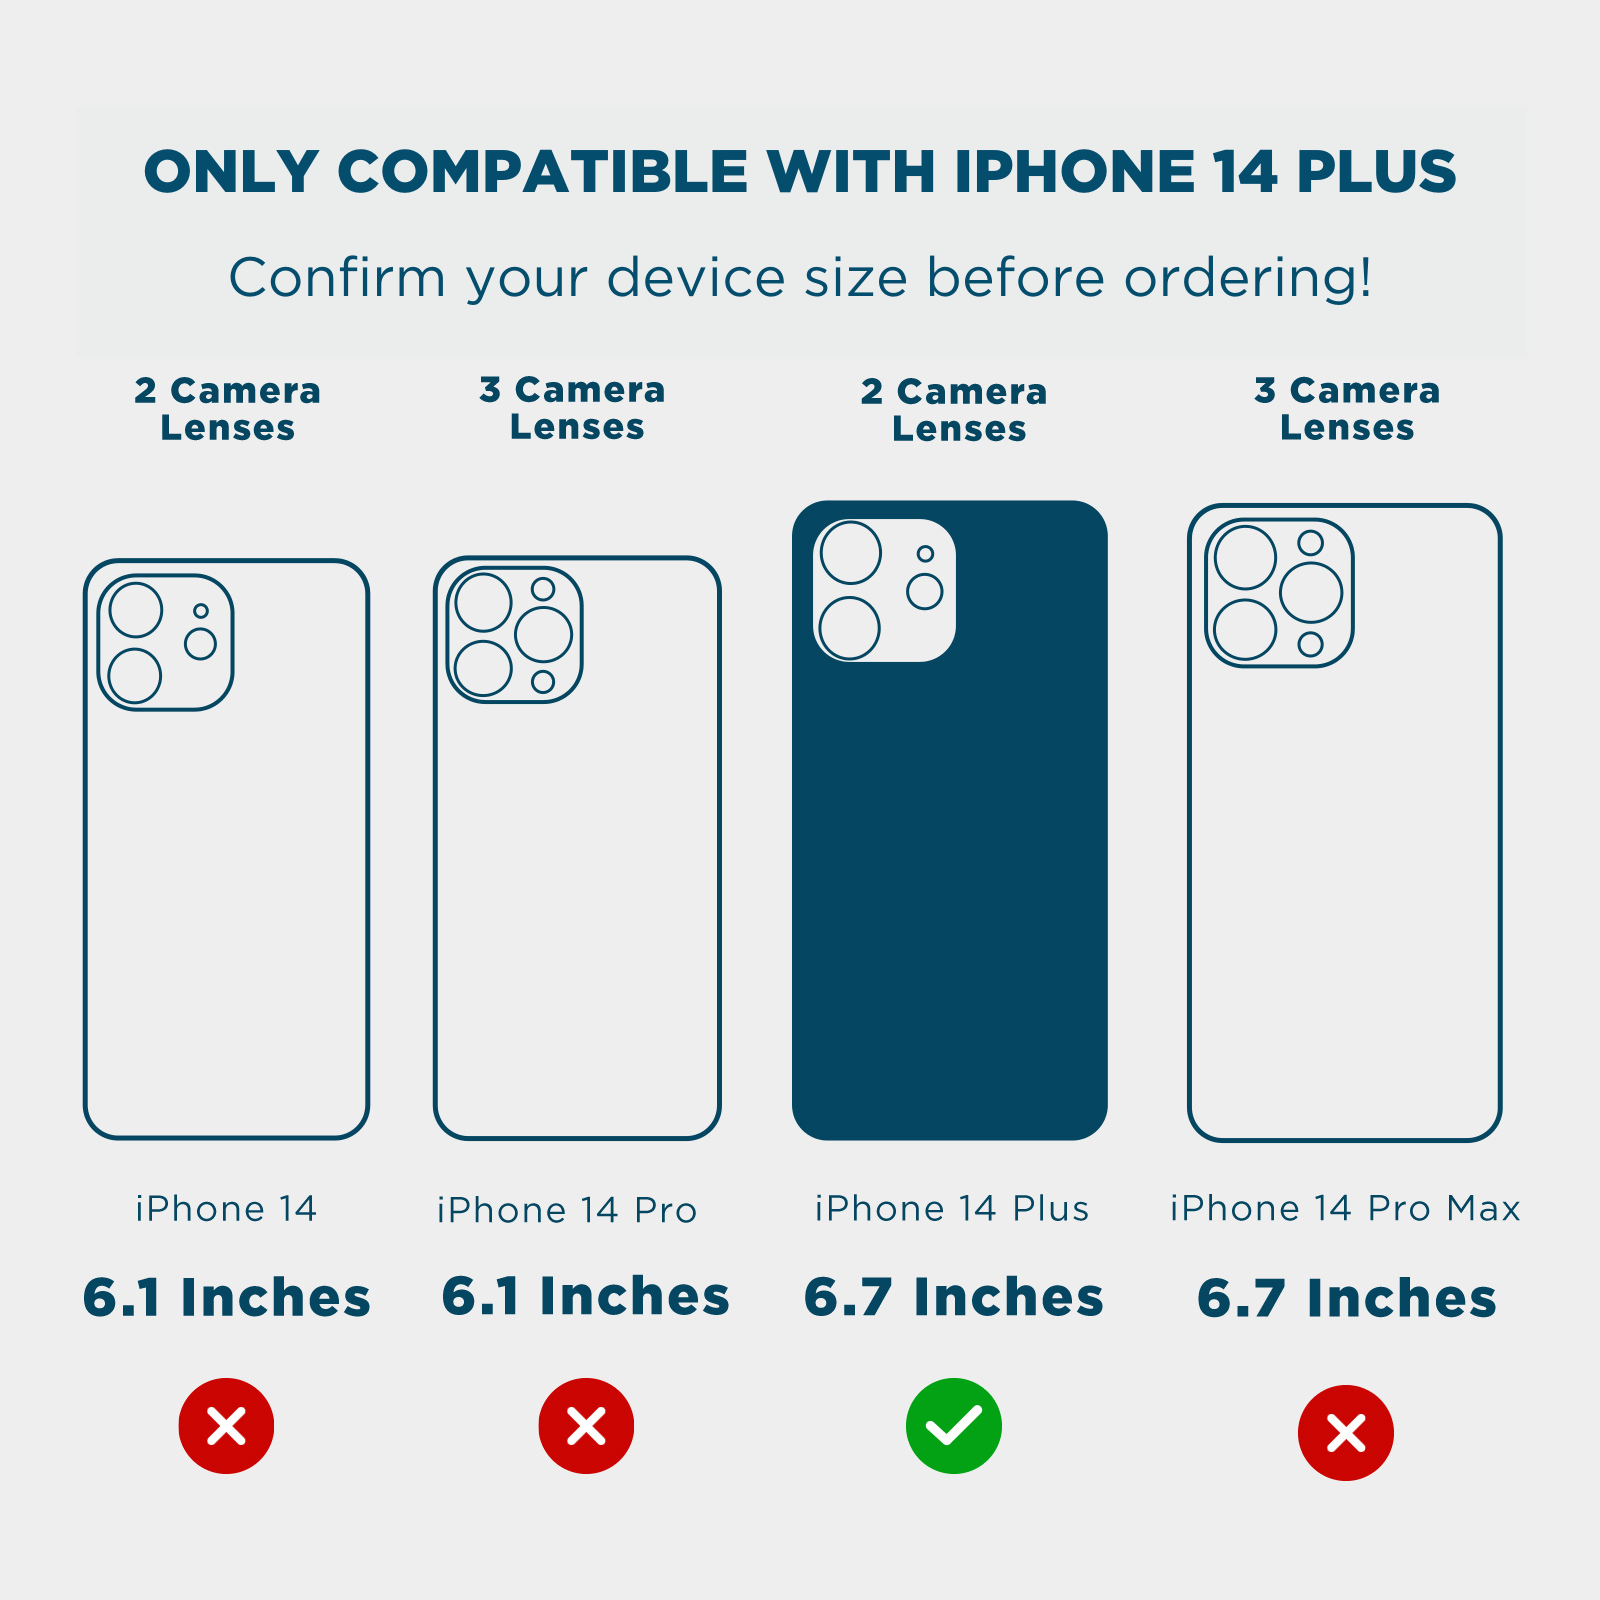 ONLY COMPATIBLE WITH IPHONE 14 PLUS. CONFIRM YOUR DEVICE SIZE BEFORE ORDERING! 2 CAMERA LENSES, 3 CAMERA LENSES, 2 CAMERA LENSES, 3 CAMERA LENSES, 6.1 INCHEC, 6.1 INCHES, 6.7 INCHES, 6.7 INCHES. COLOR::IRIDESCENT